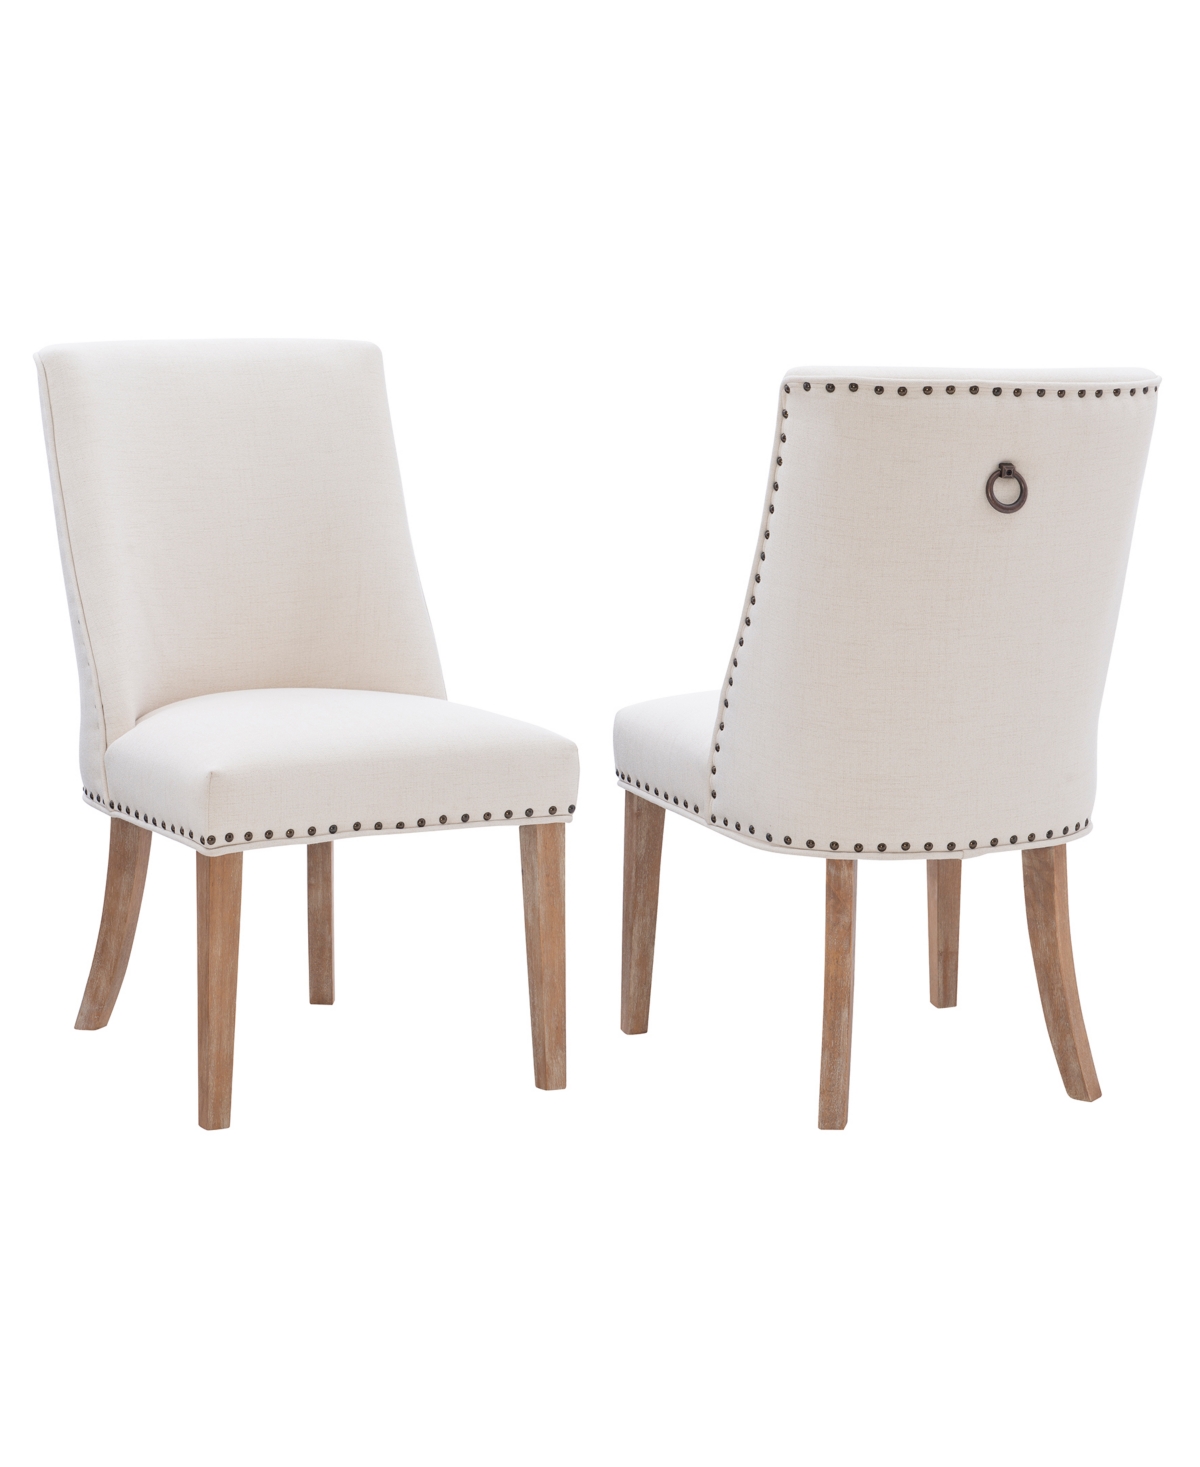 Linon Home Decor Powell Furniture Allard Upholstered Dining Chairs - Set Of 2 In Natural